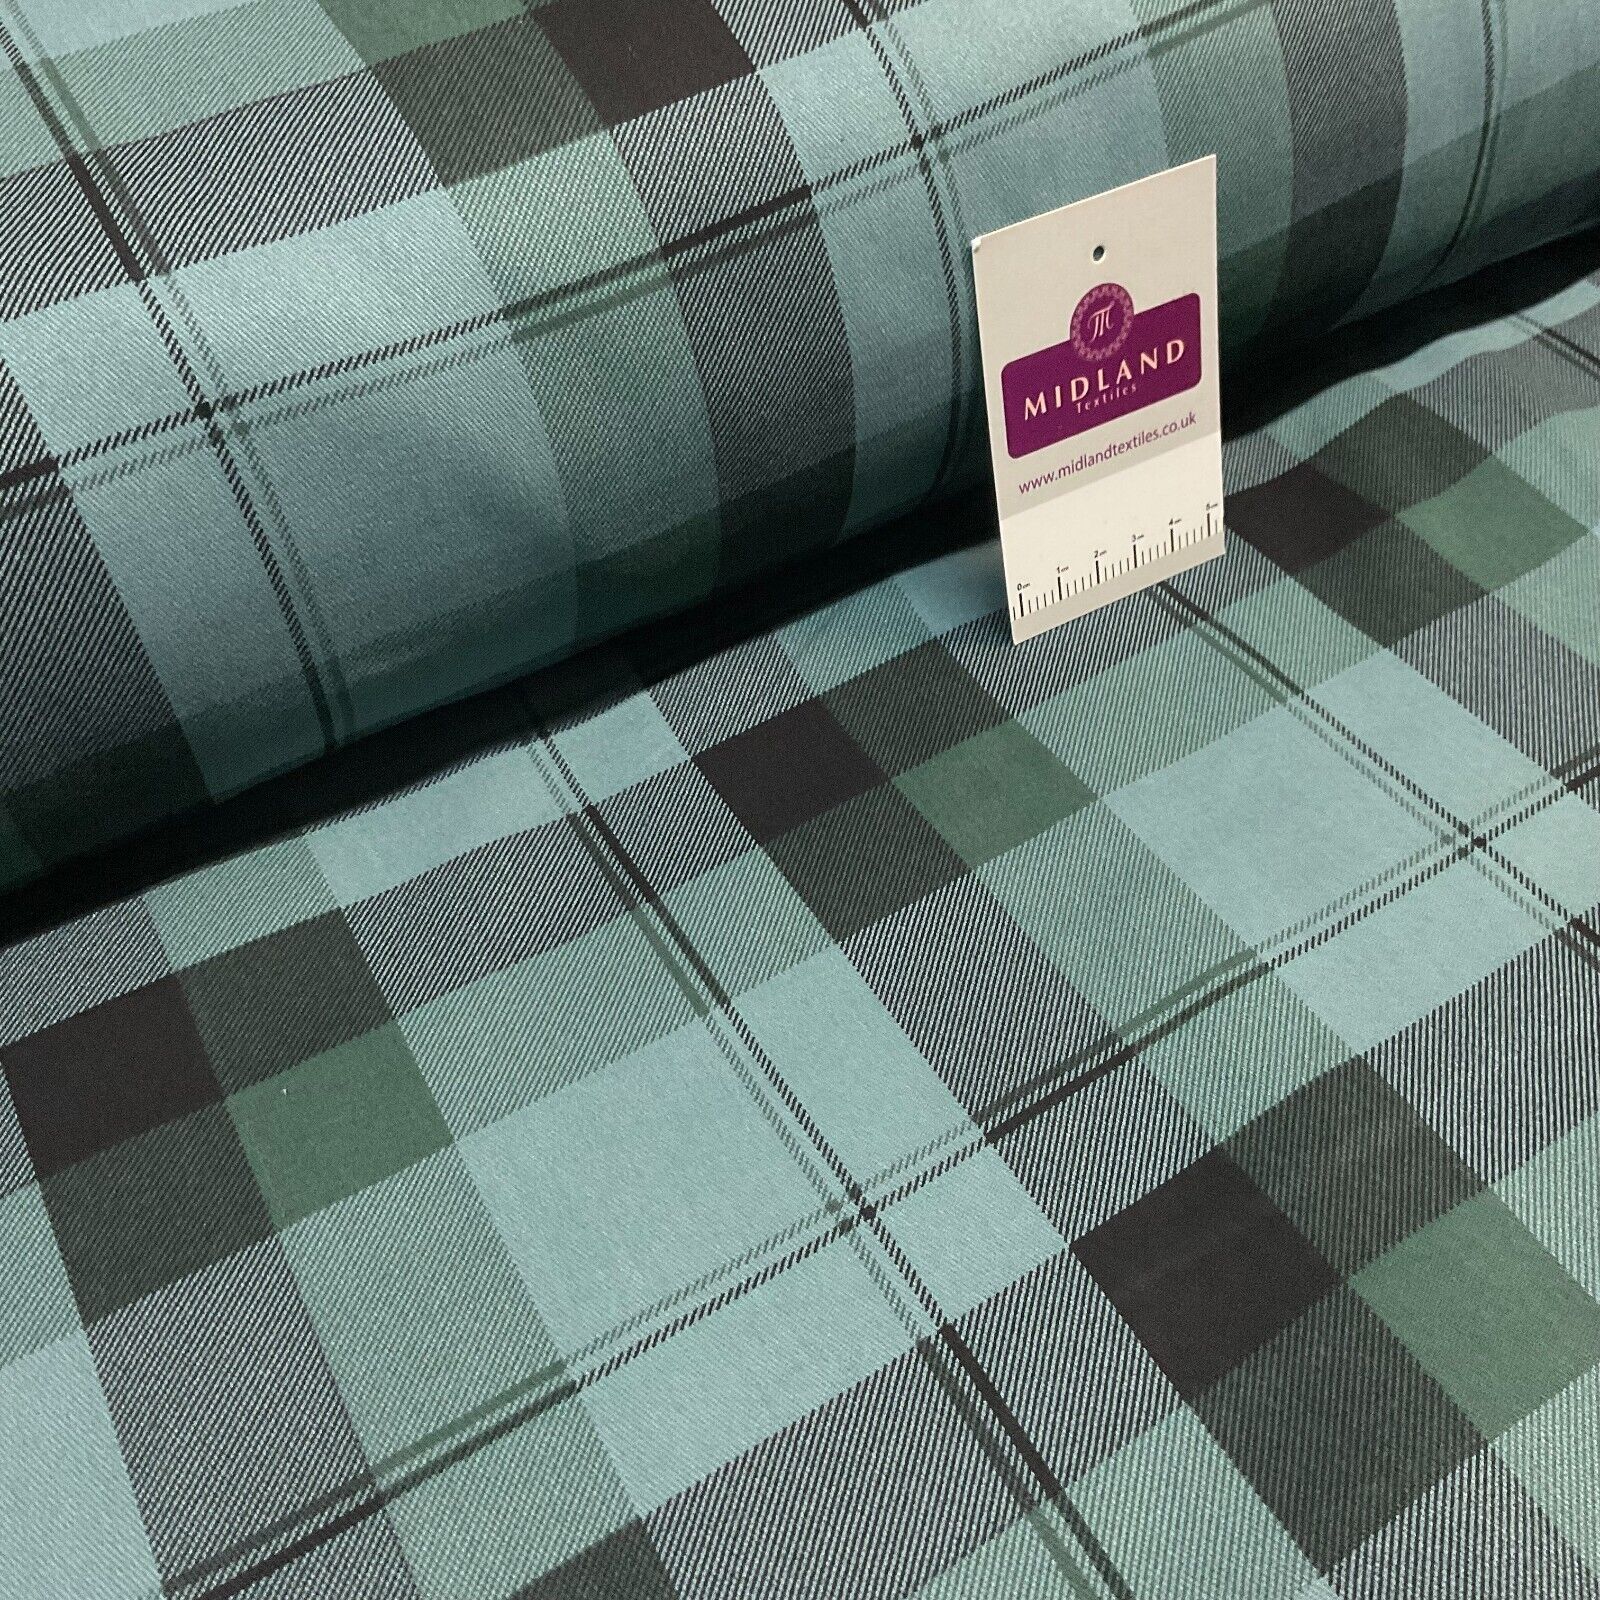 Cotton Check Flannel Fabric  Brushed & Cosy - Navy Sunshine